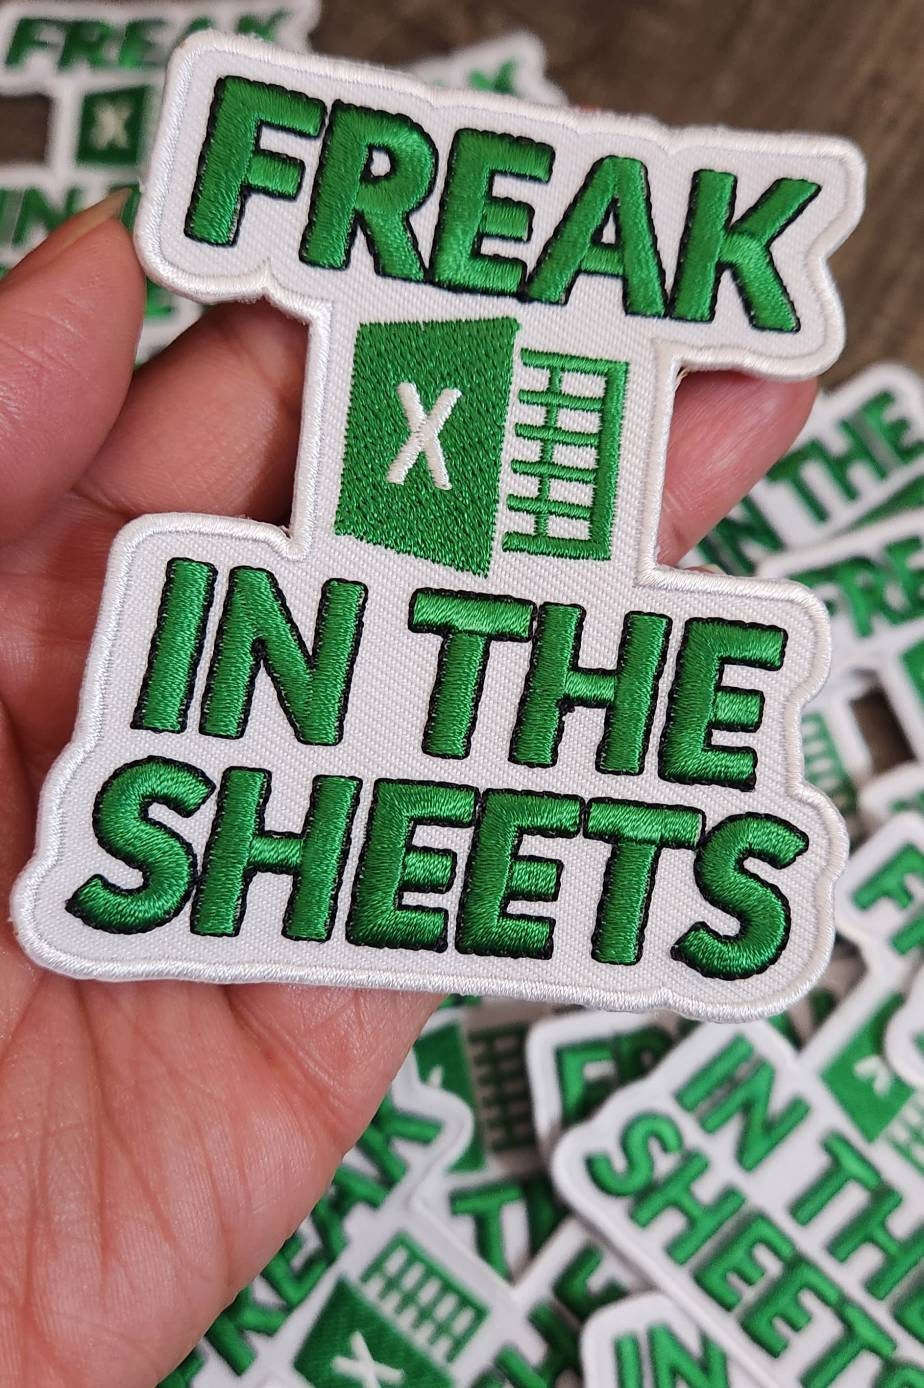 Funny, Freak in the Sheets 1-pc xcel Patch, Iron-on Embroidered Patch,  Size 3.5, Accounting Gifts, Boss Gifts, Funny Patch for Office